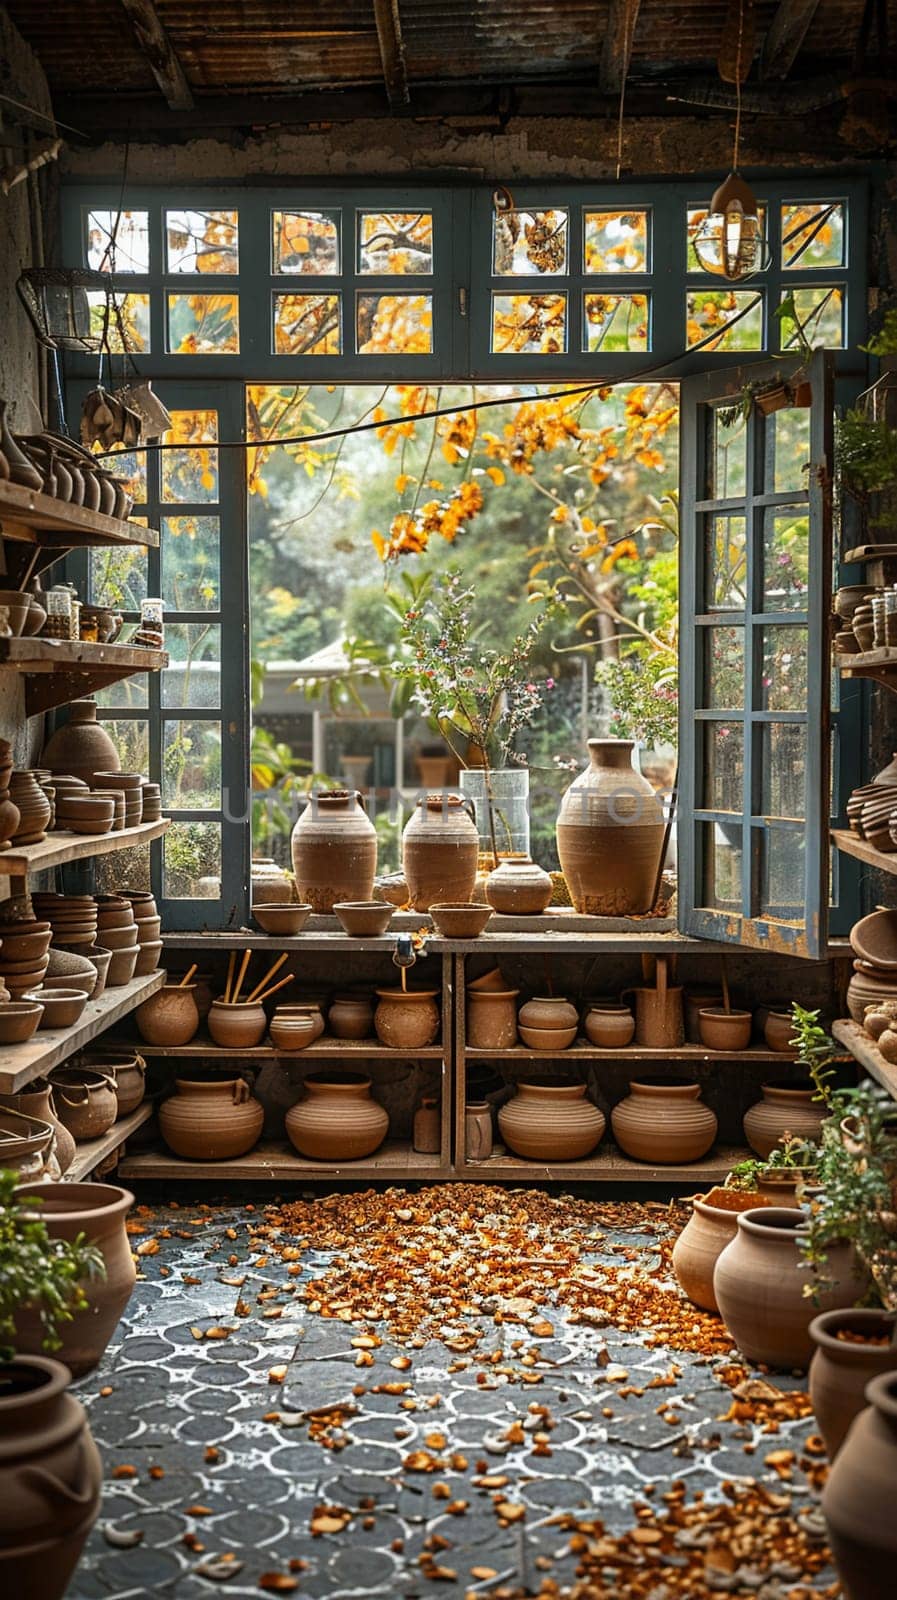 Rustic pottery studio with clay tools and a kiln.